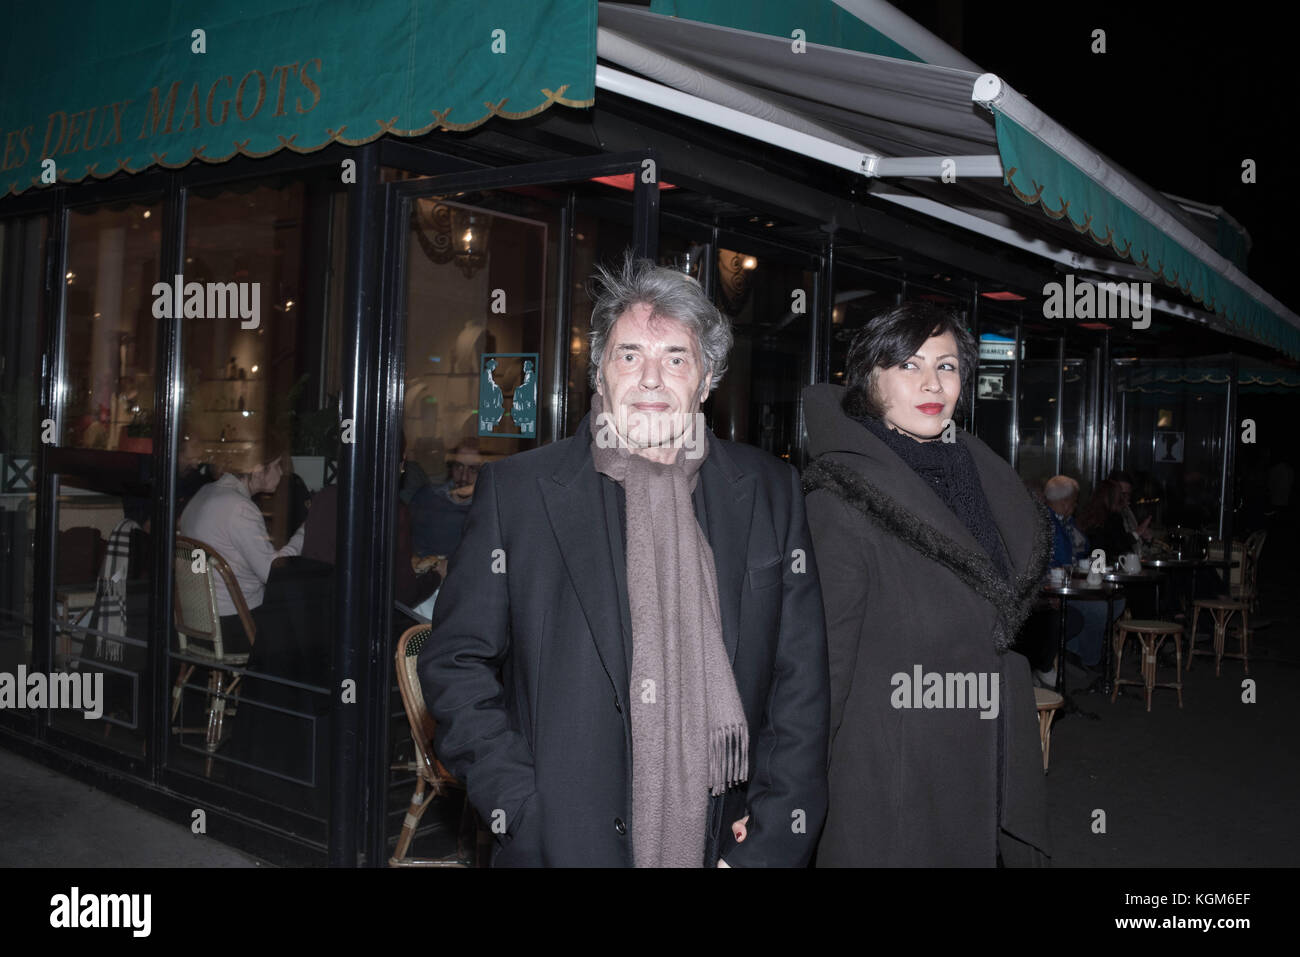 Saint-Germain-des-Prés in Paris - Photo opportunity - Yves Simon French singer - songwriter company of Ameneh Moayedi graphic artist and photographer Stock Photo